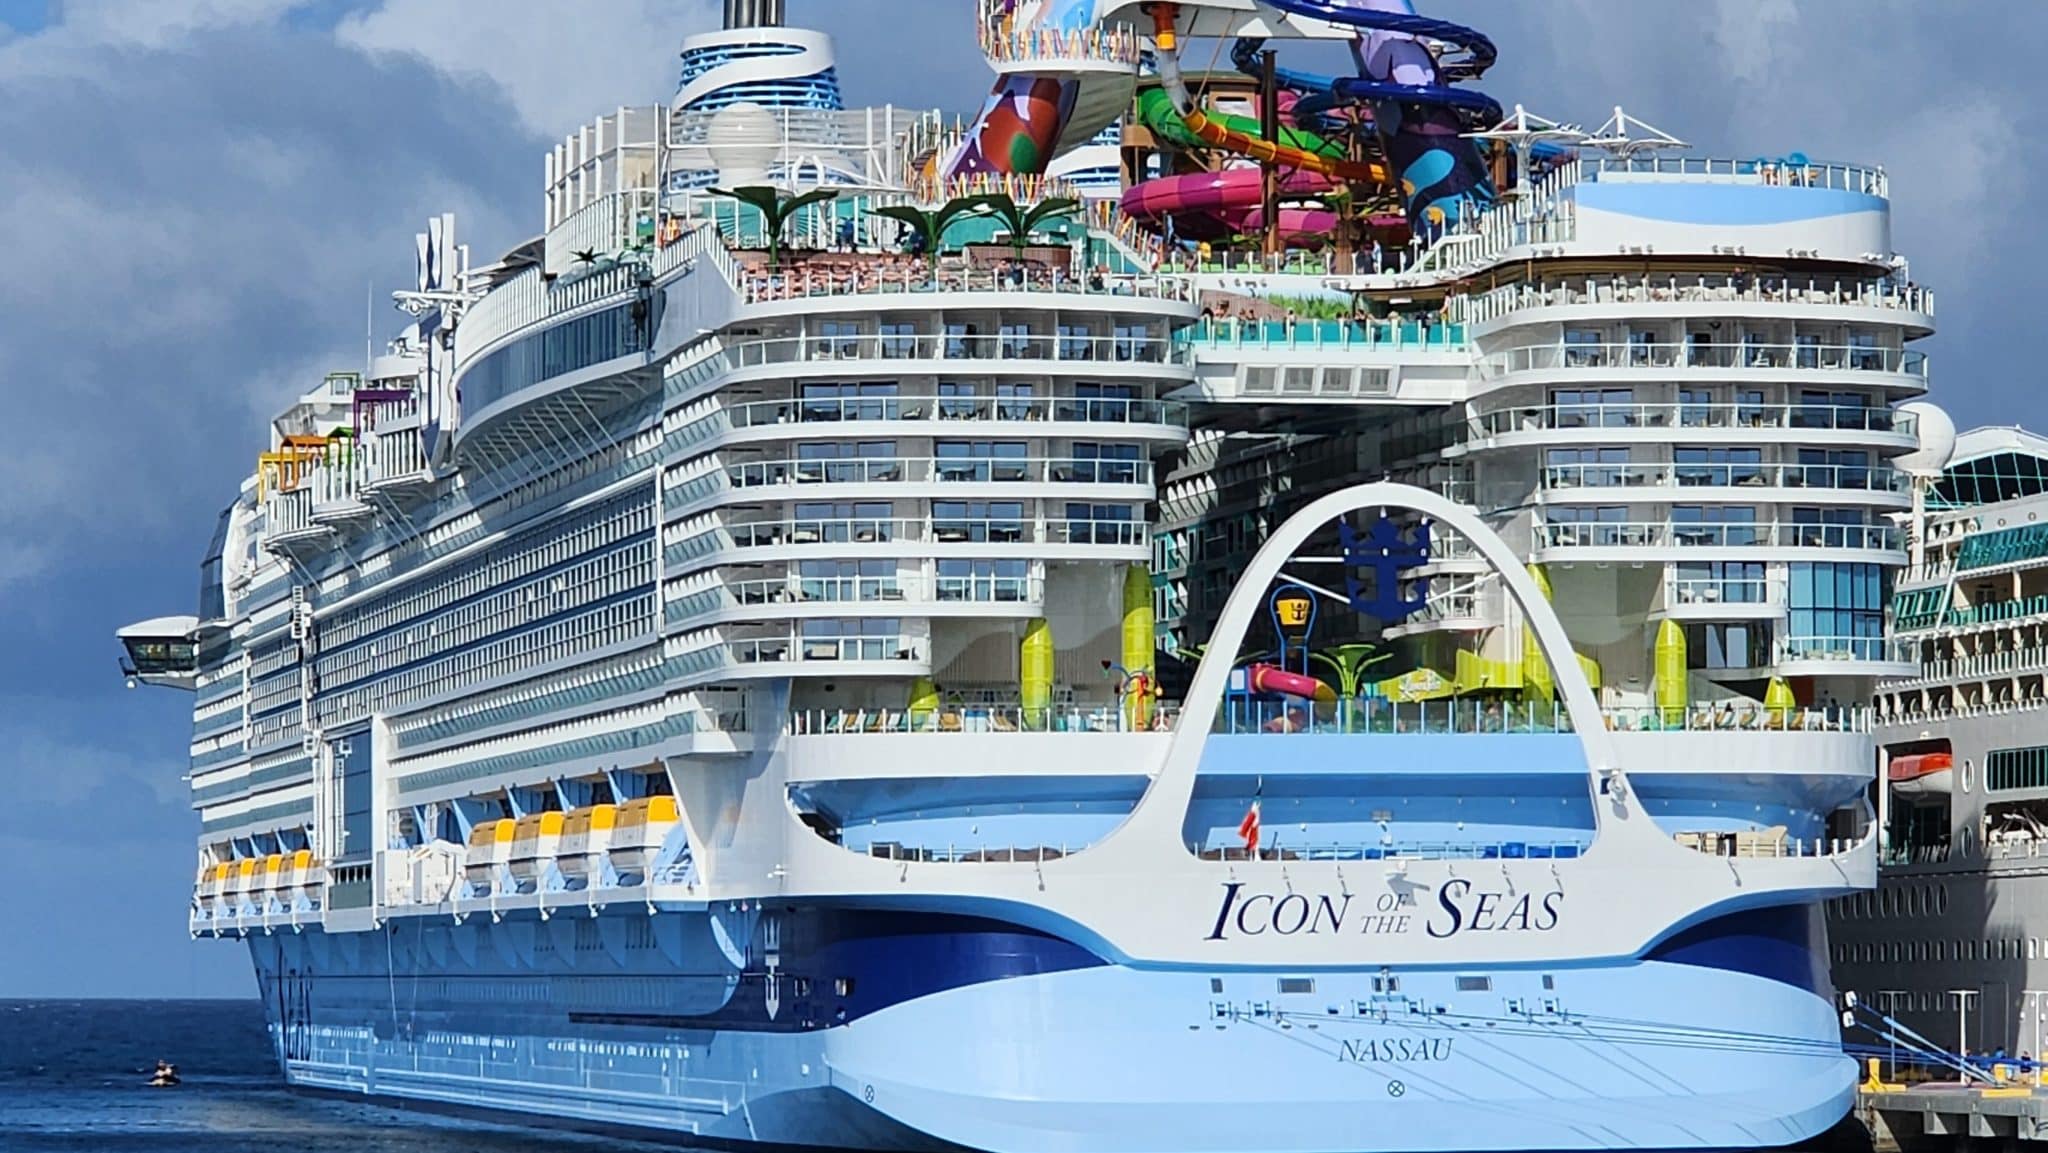 Royal Caribbean's Icon of the Seas, the world's largest cruise ship